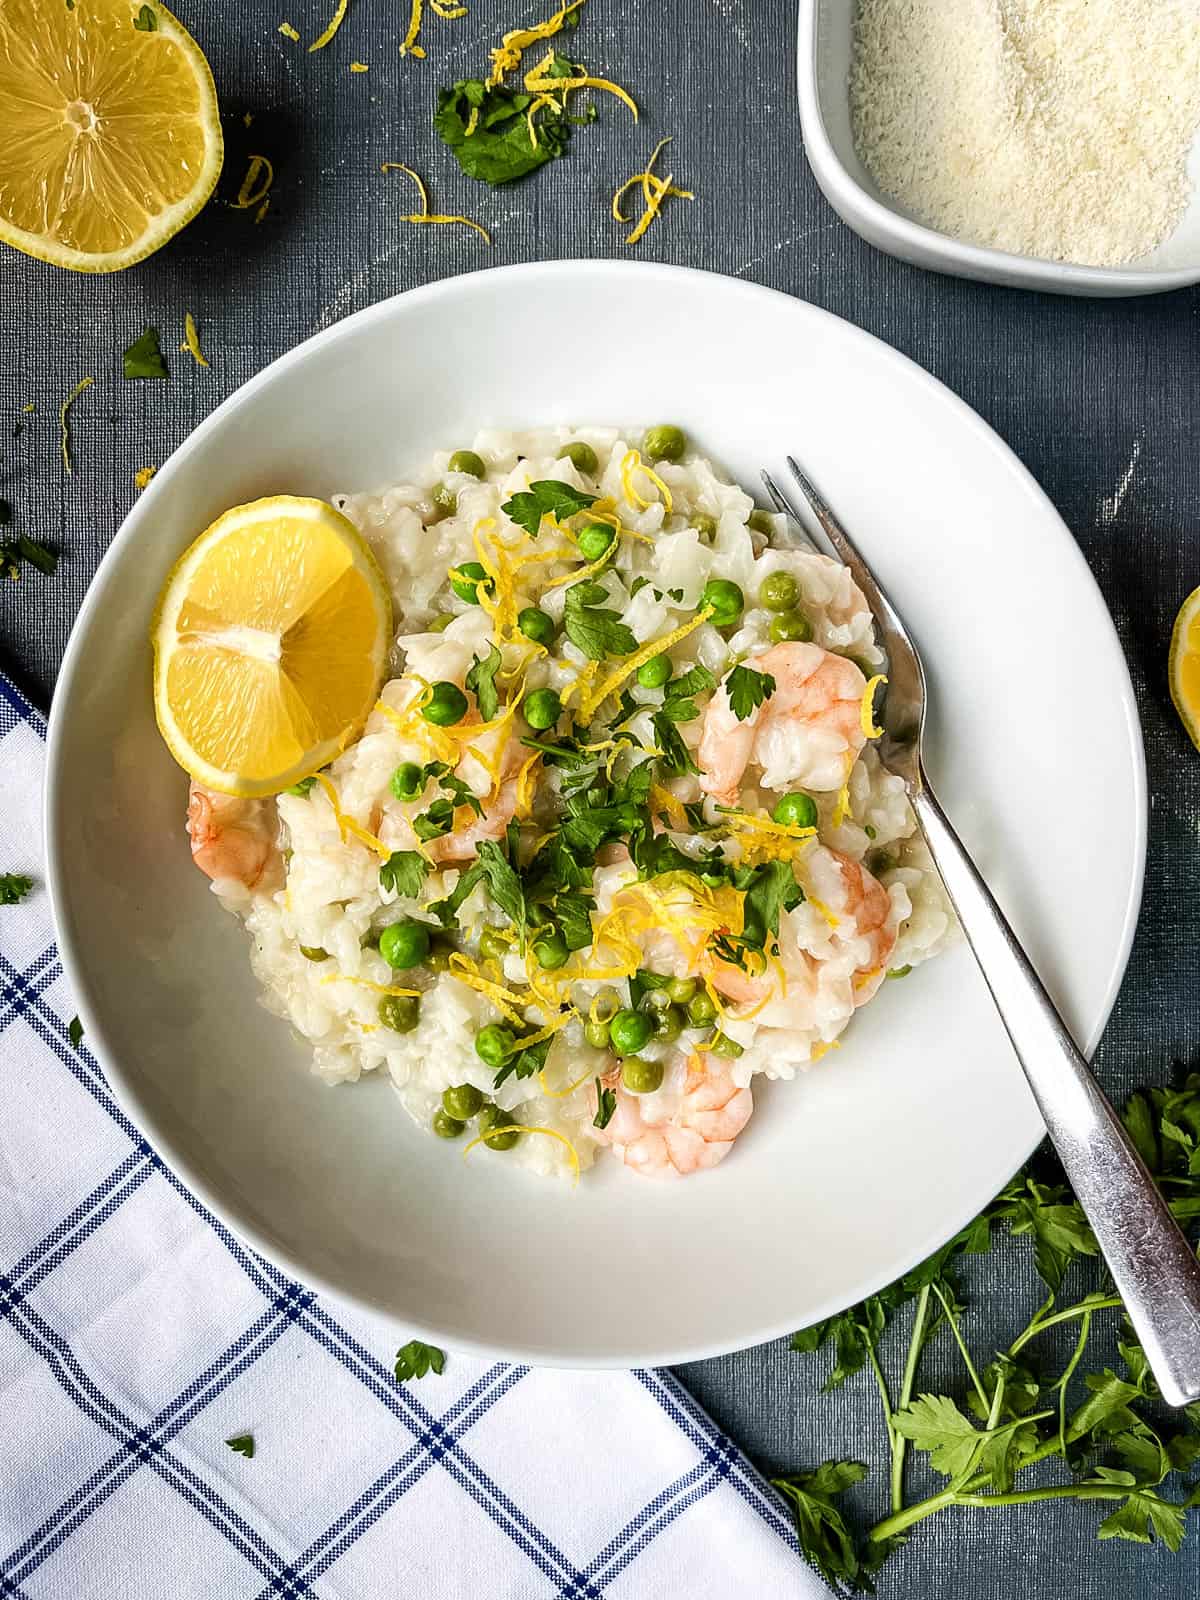 prawn and pea risotto with lemon zest in a bowl.